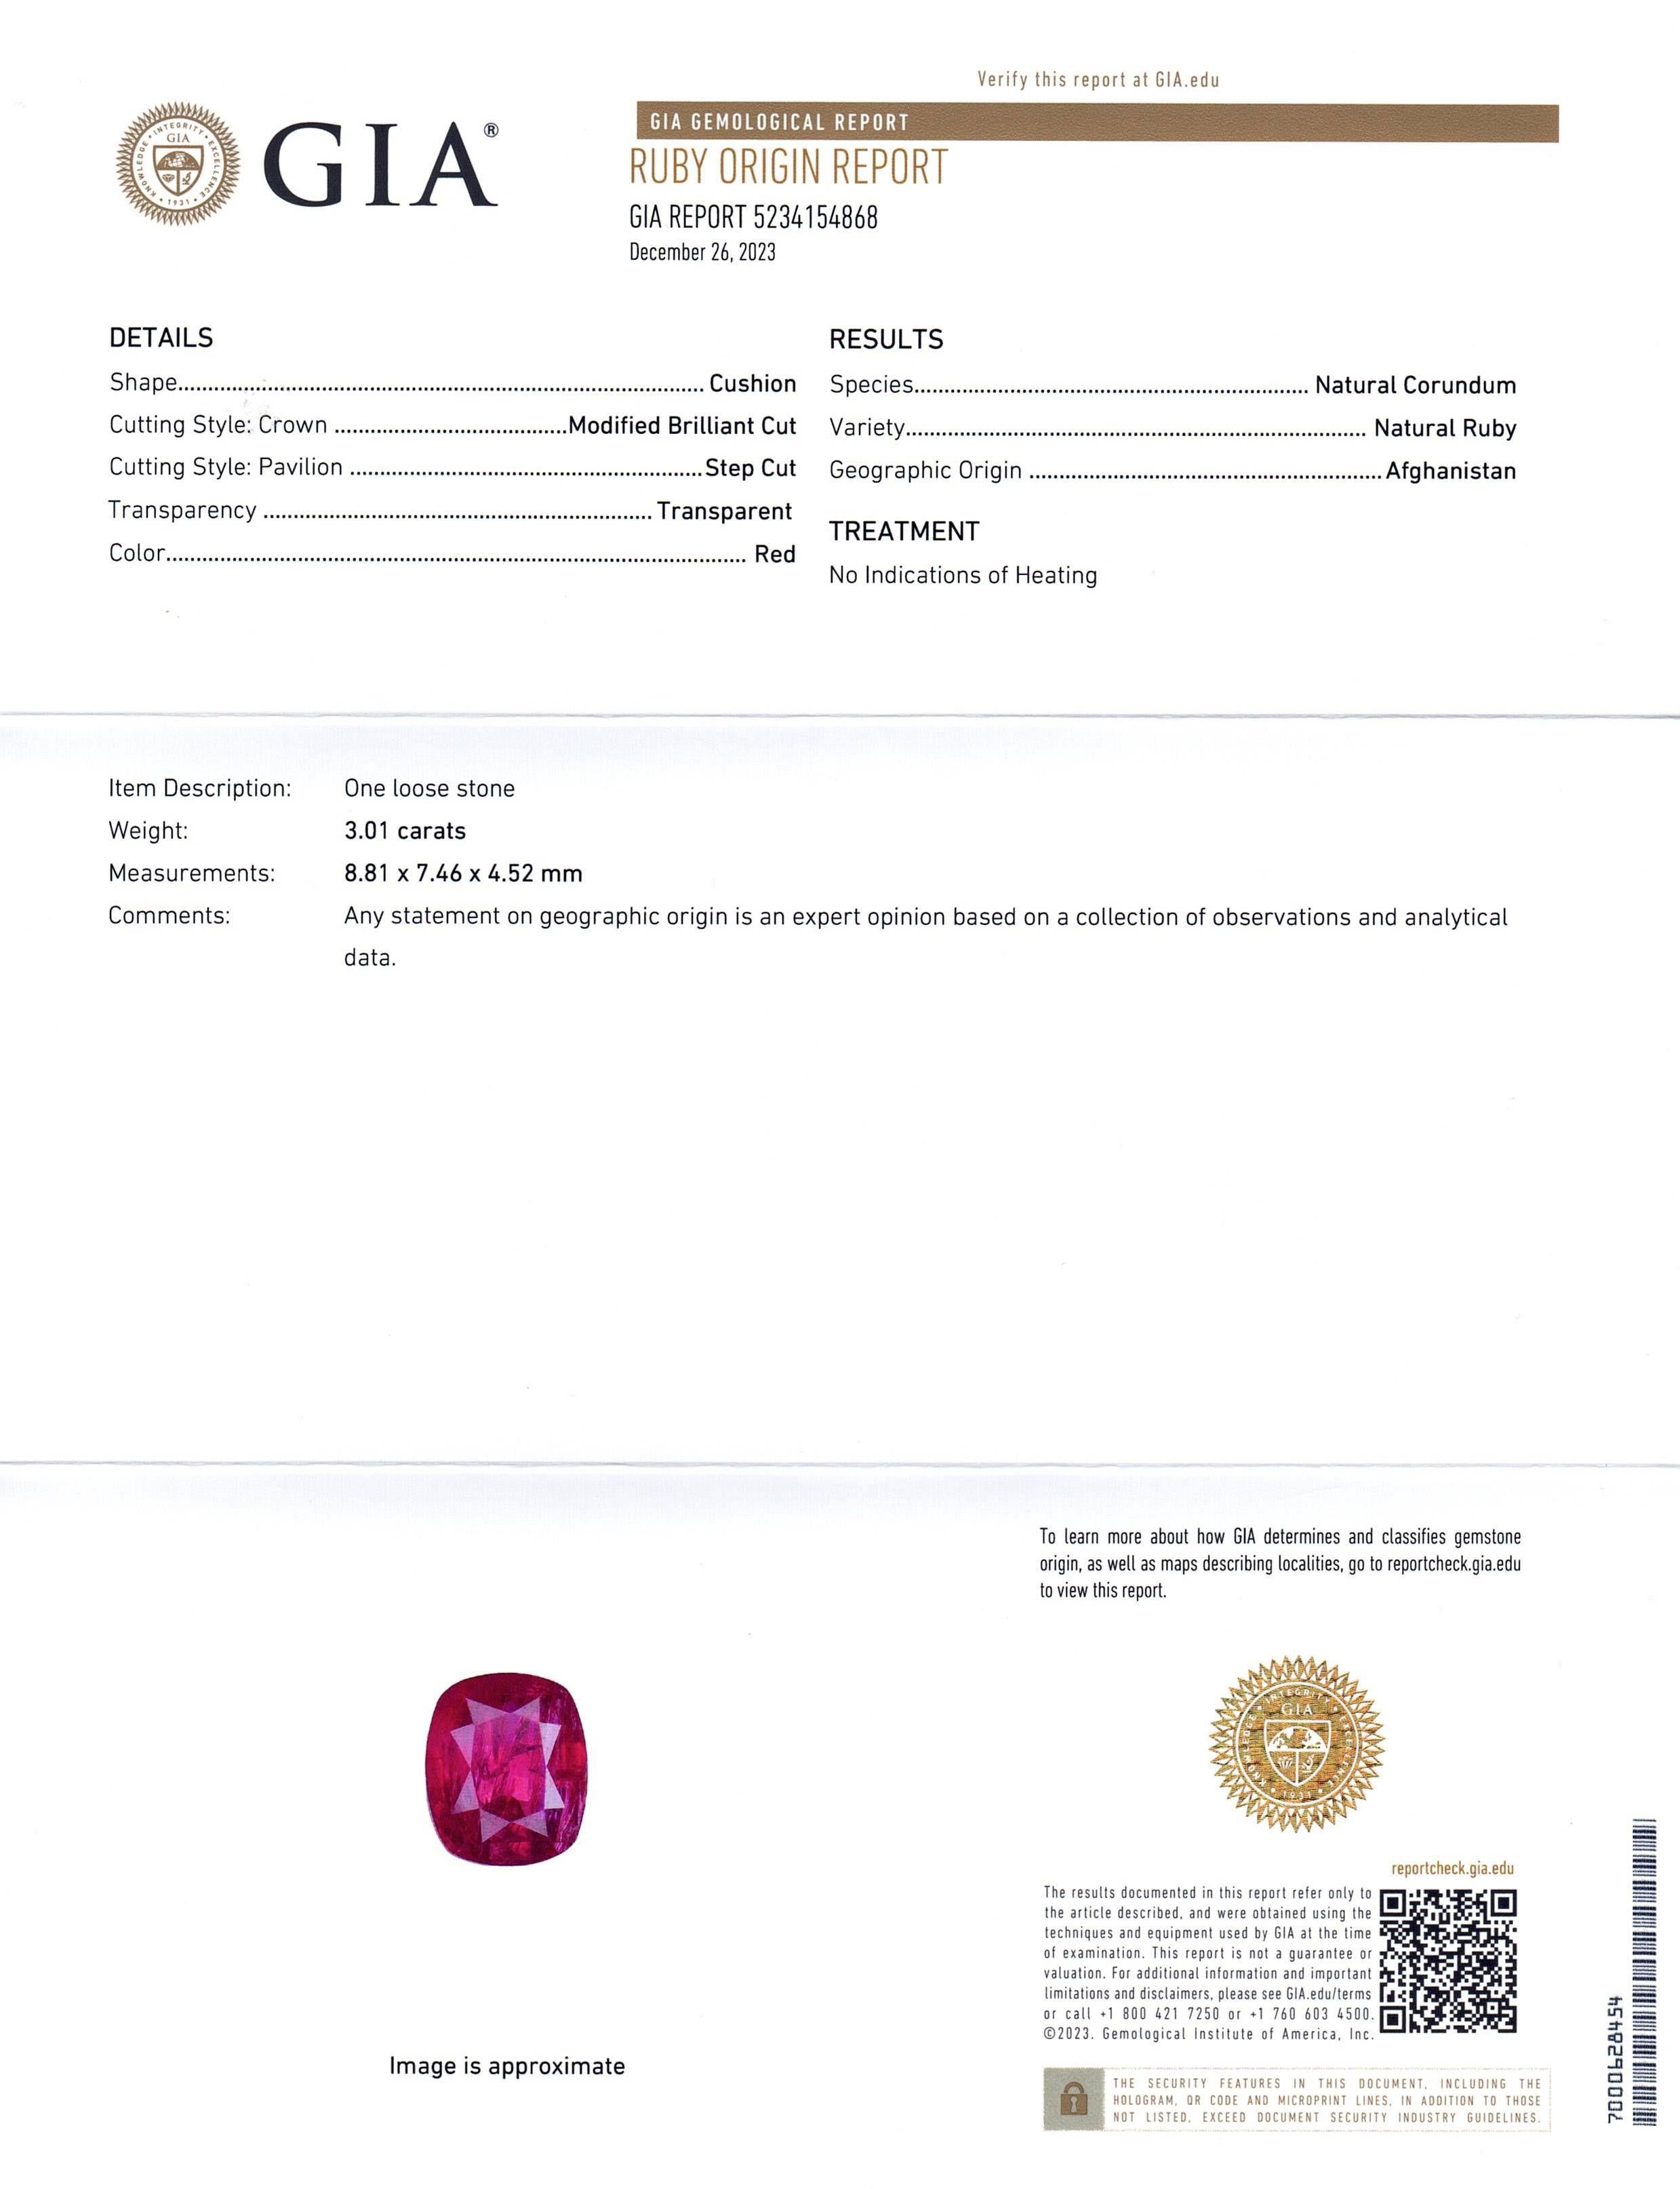 This is a stunning GIA Certified Ruby 


The GIA report reads as follows:

GIA Report Number: 5234154868
Shape: Cushion
Cutting Style: 
Cutting Style: Crown: Modified Brilliant Cut
Cutting Style: Pavilion: Step Cut
Transparency: Transparent
Colour: